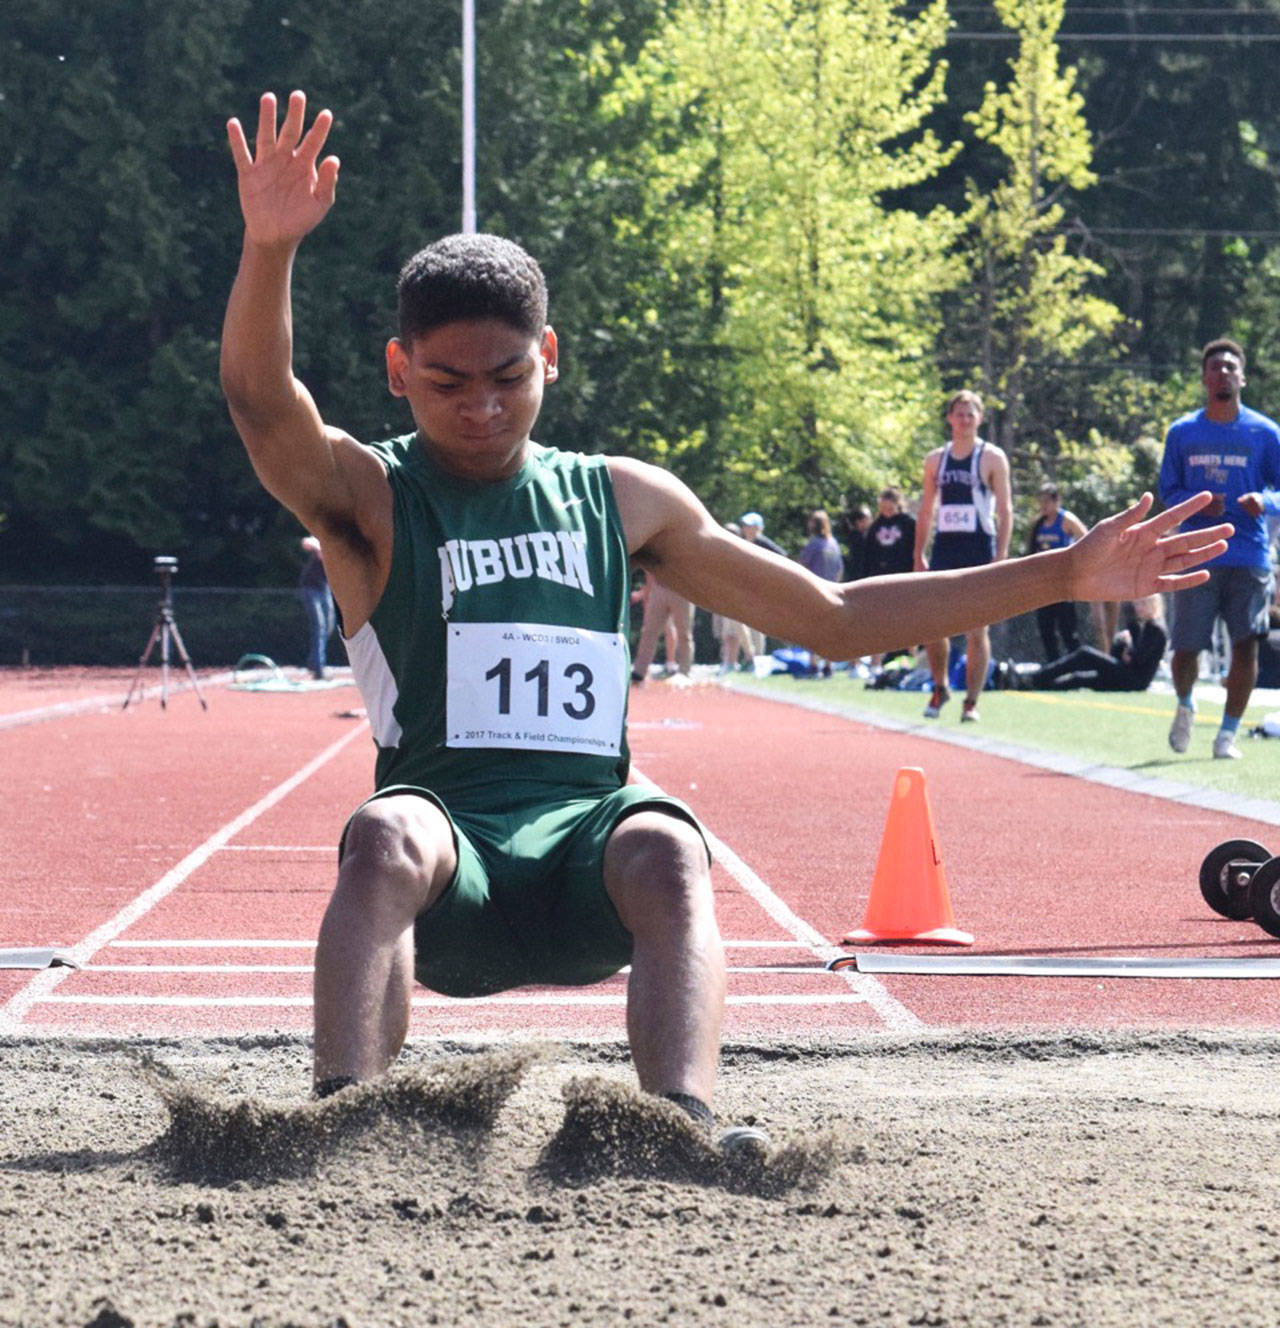 Auburn’s D’Angelo Washington lands in the sand after taking the district long jump title with a leap of 22 feet, 7 inches on Thursday at French Field. RACHEL CIAMPI, Auburn Reporter